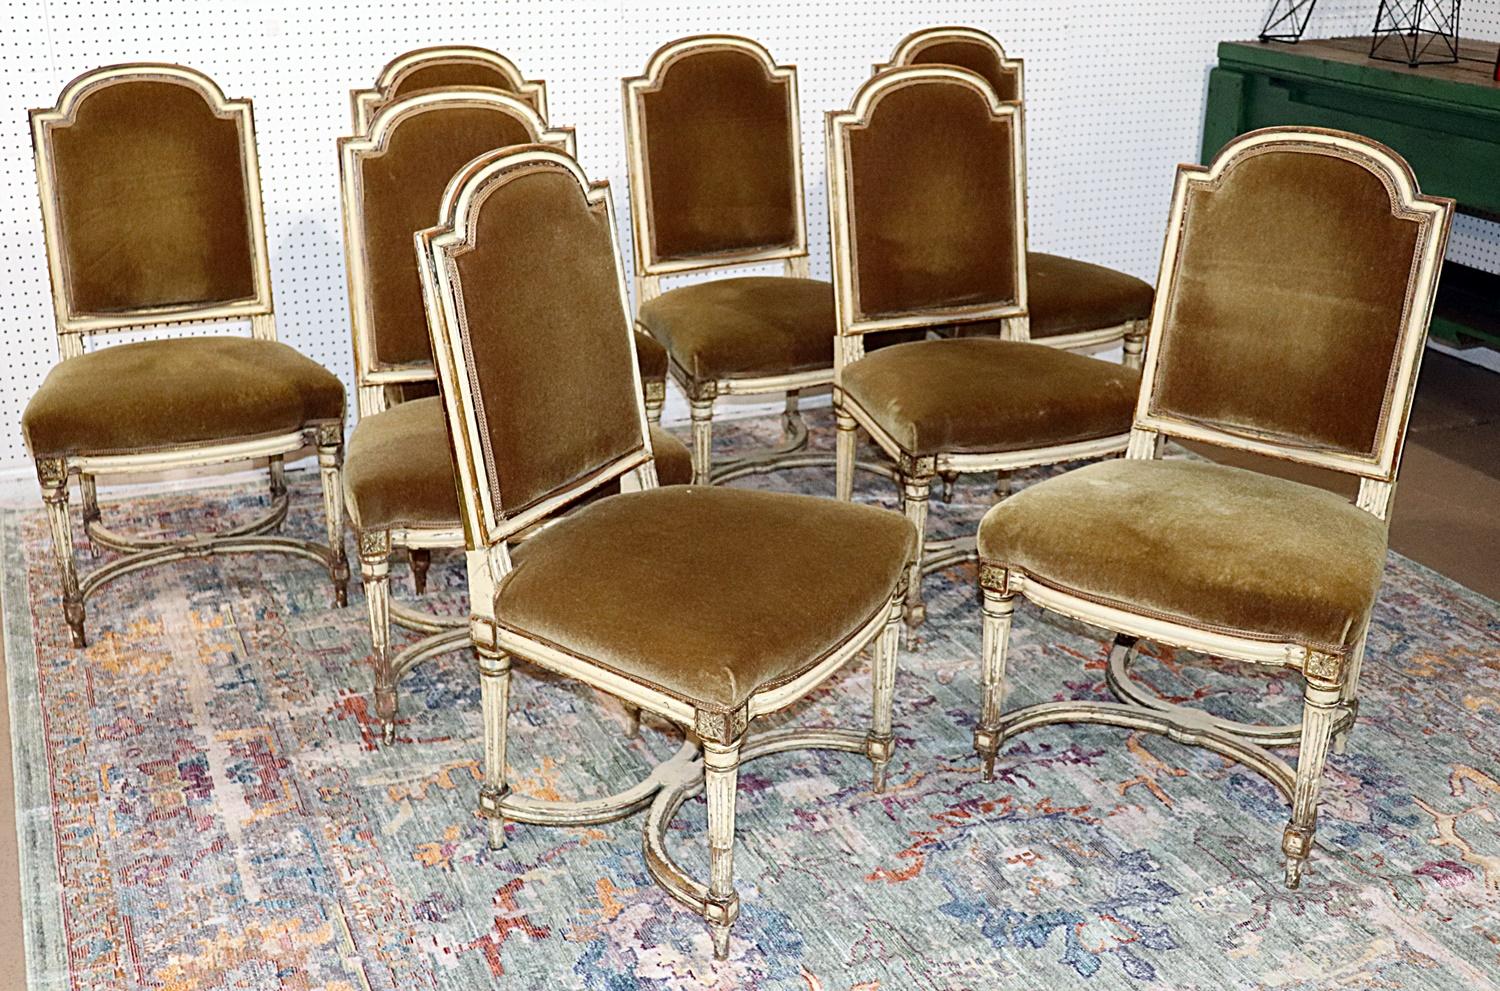 Set of 8 Swedish style distressed painted walnut side chairs with mohair upholstery.